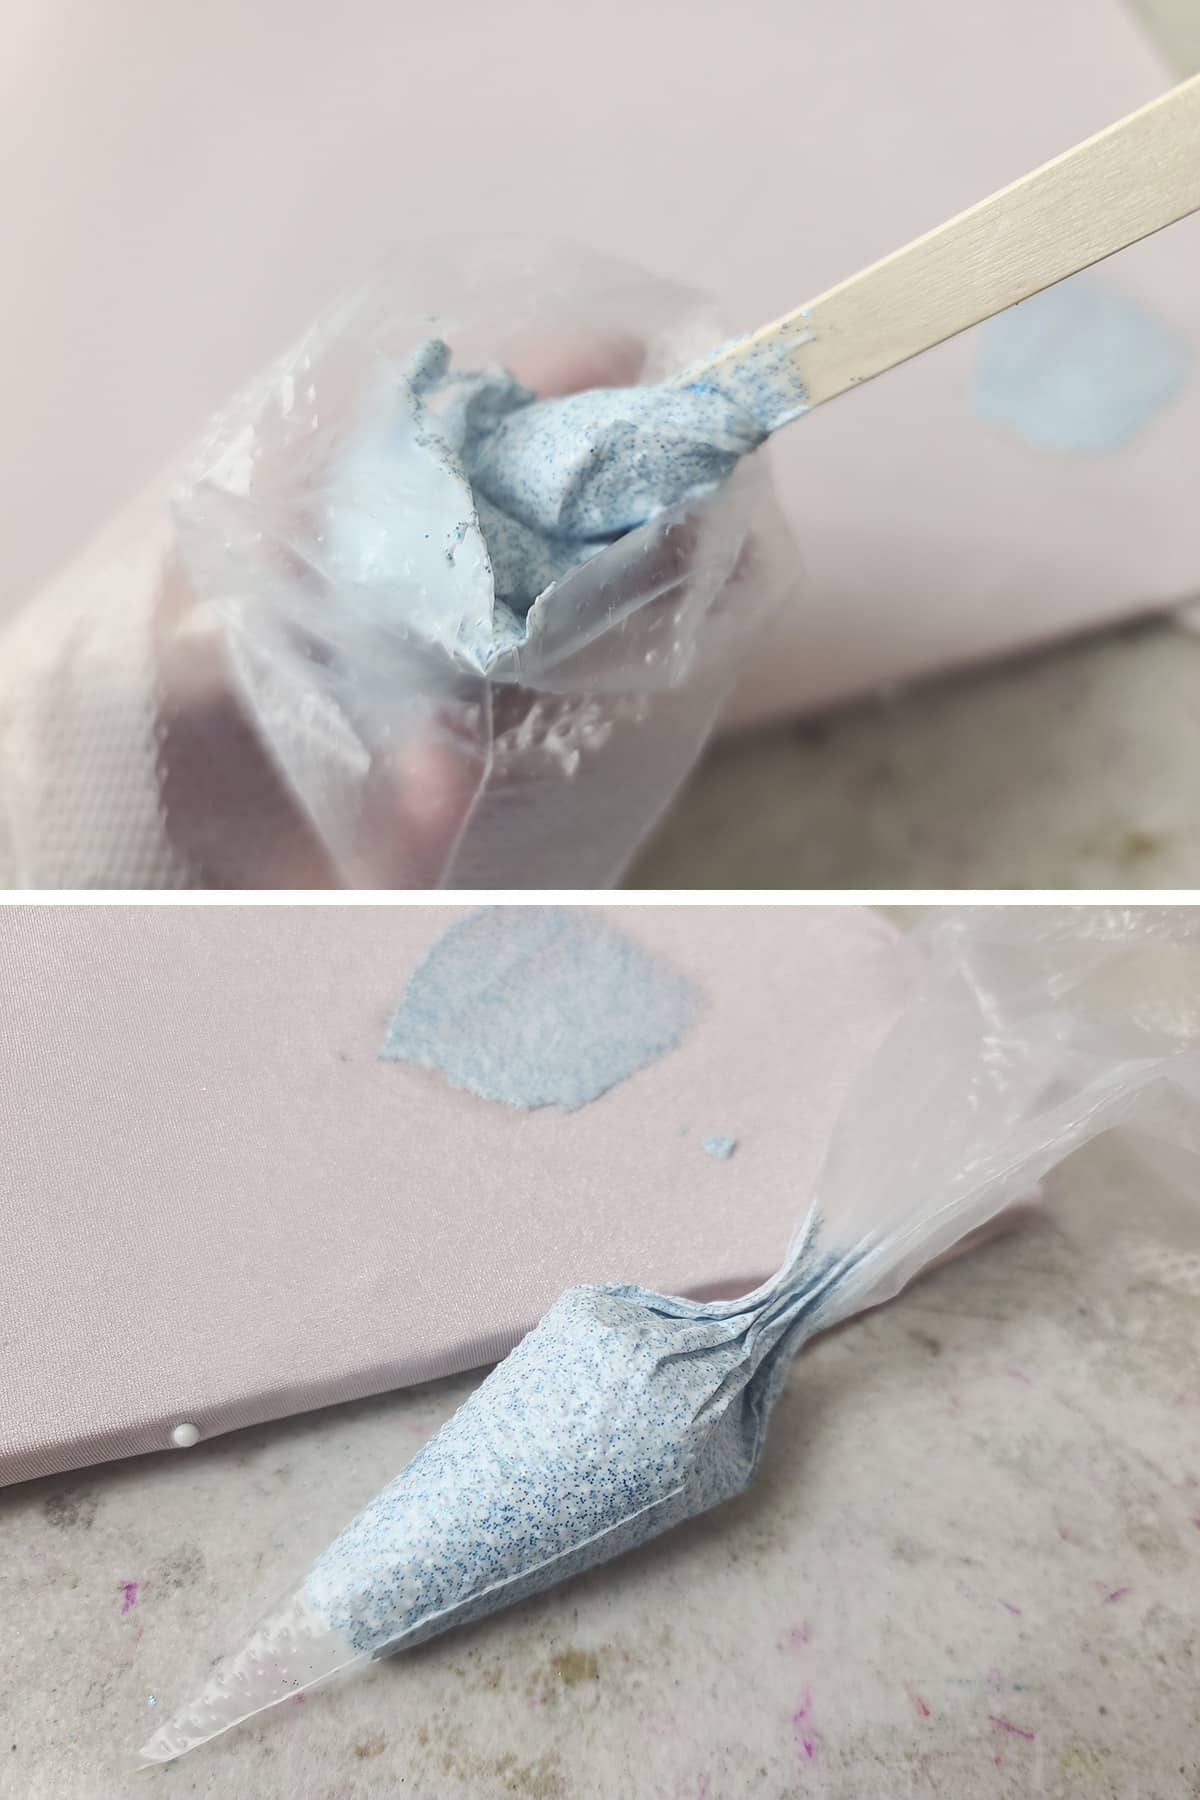 A two part compilation image showing blue glitter caulking being transferred to a clear plastic pastry bag.